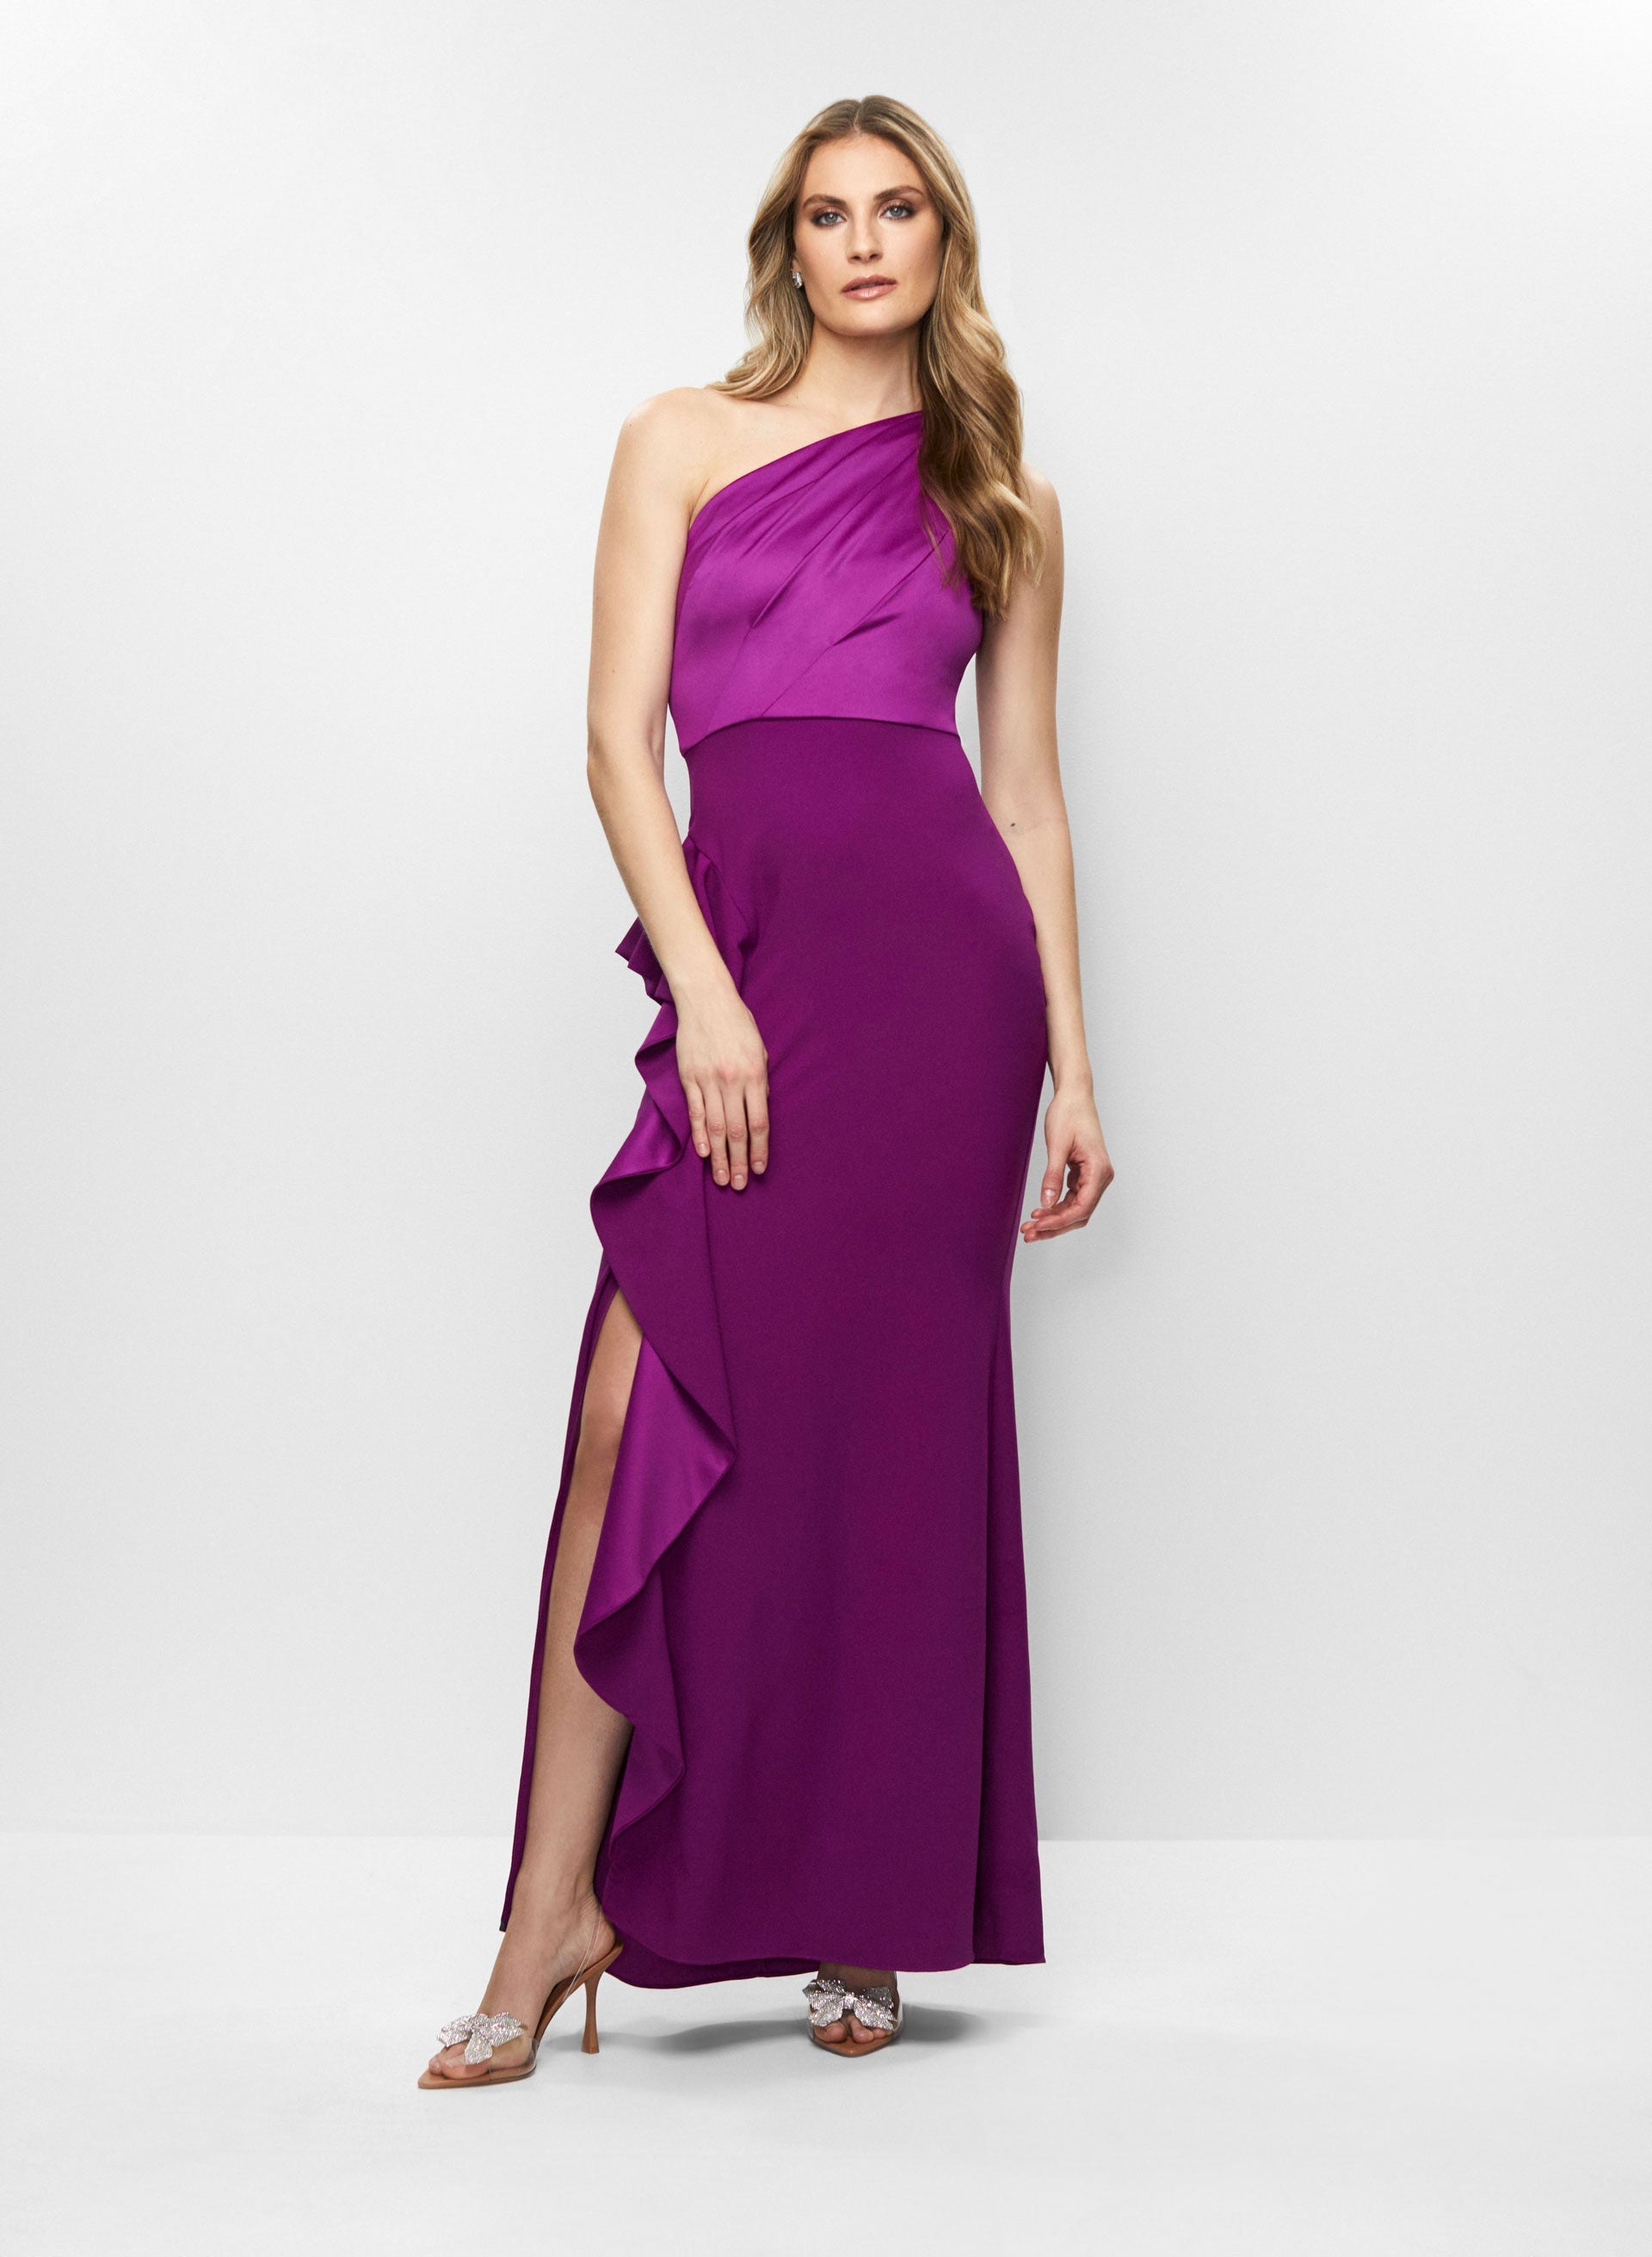 Adrianna Papell - Satin Bodice One-Shoulder Gown